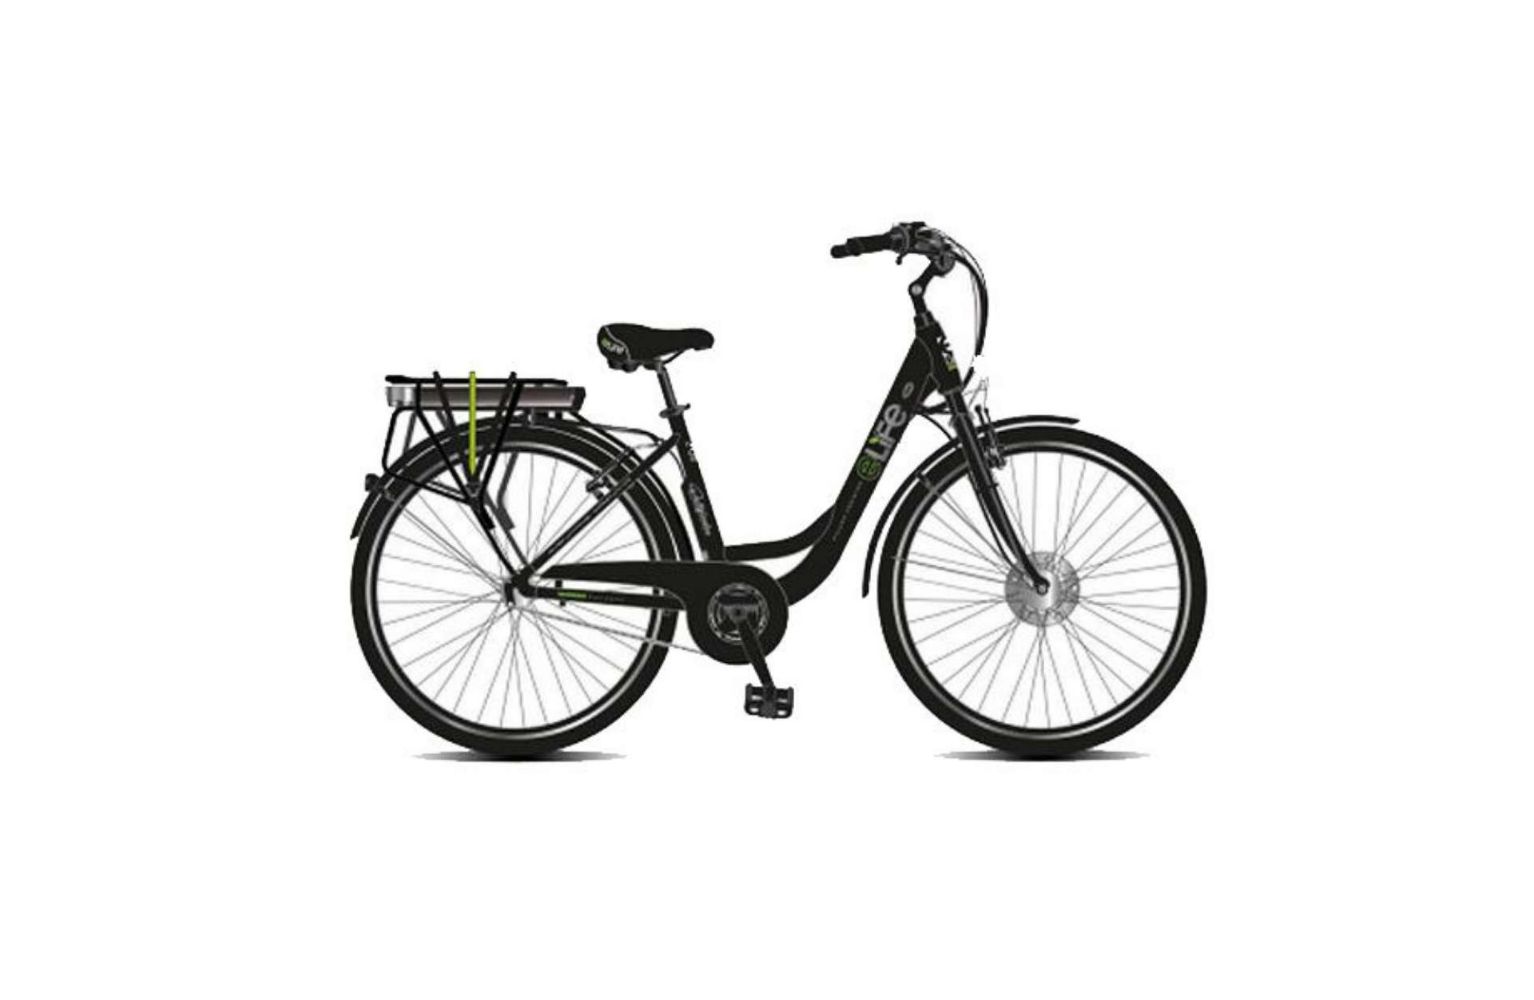 BRAND NEW MENS AND LADIES HIGH END ELECTRIC BIKES IN TRADE AND INDIVIDUAL LOTS, RRP £1299 EACH. DELIVERY AVAILABLE